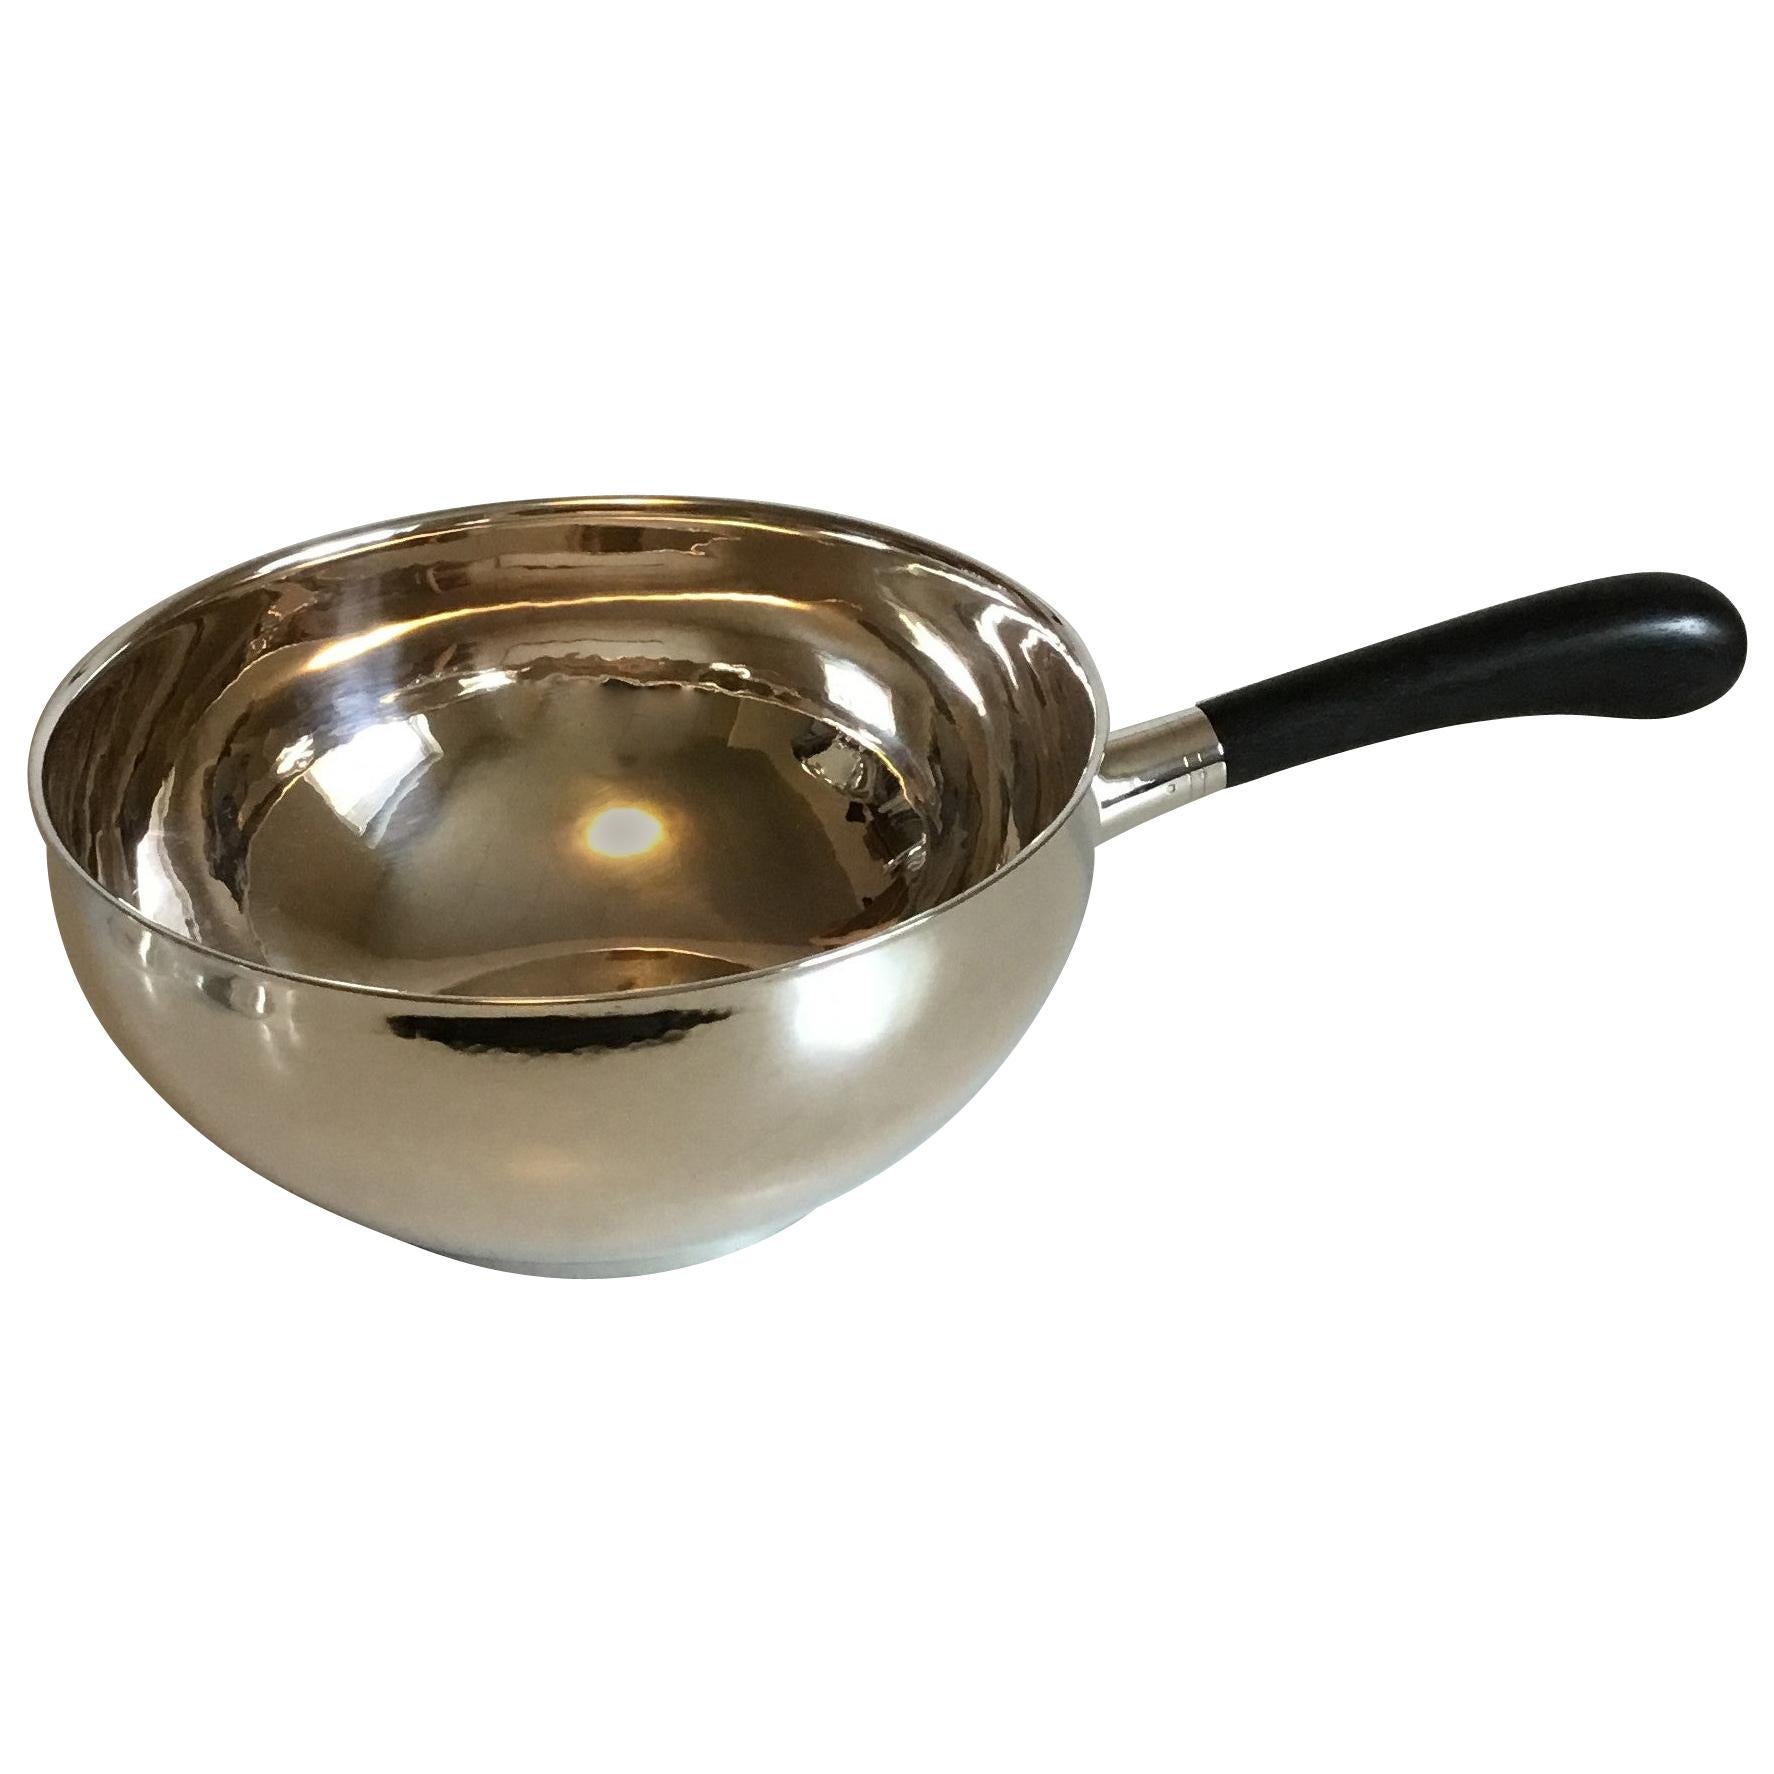 Evald Nielsen Silver Sauce Pan with Wood Shaft